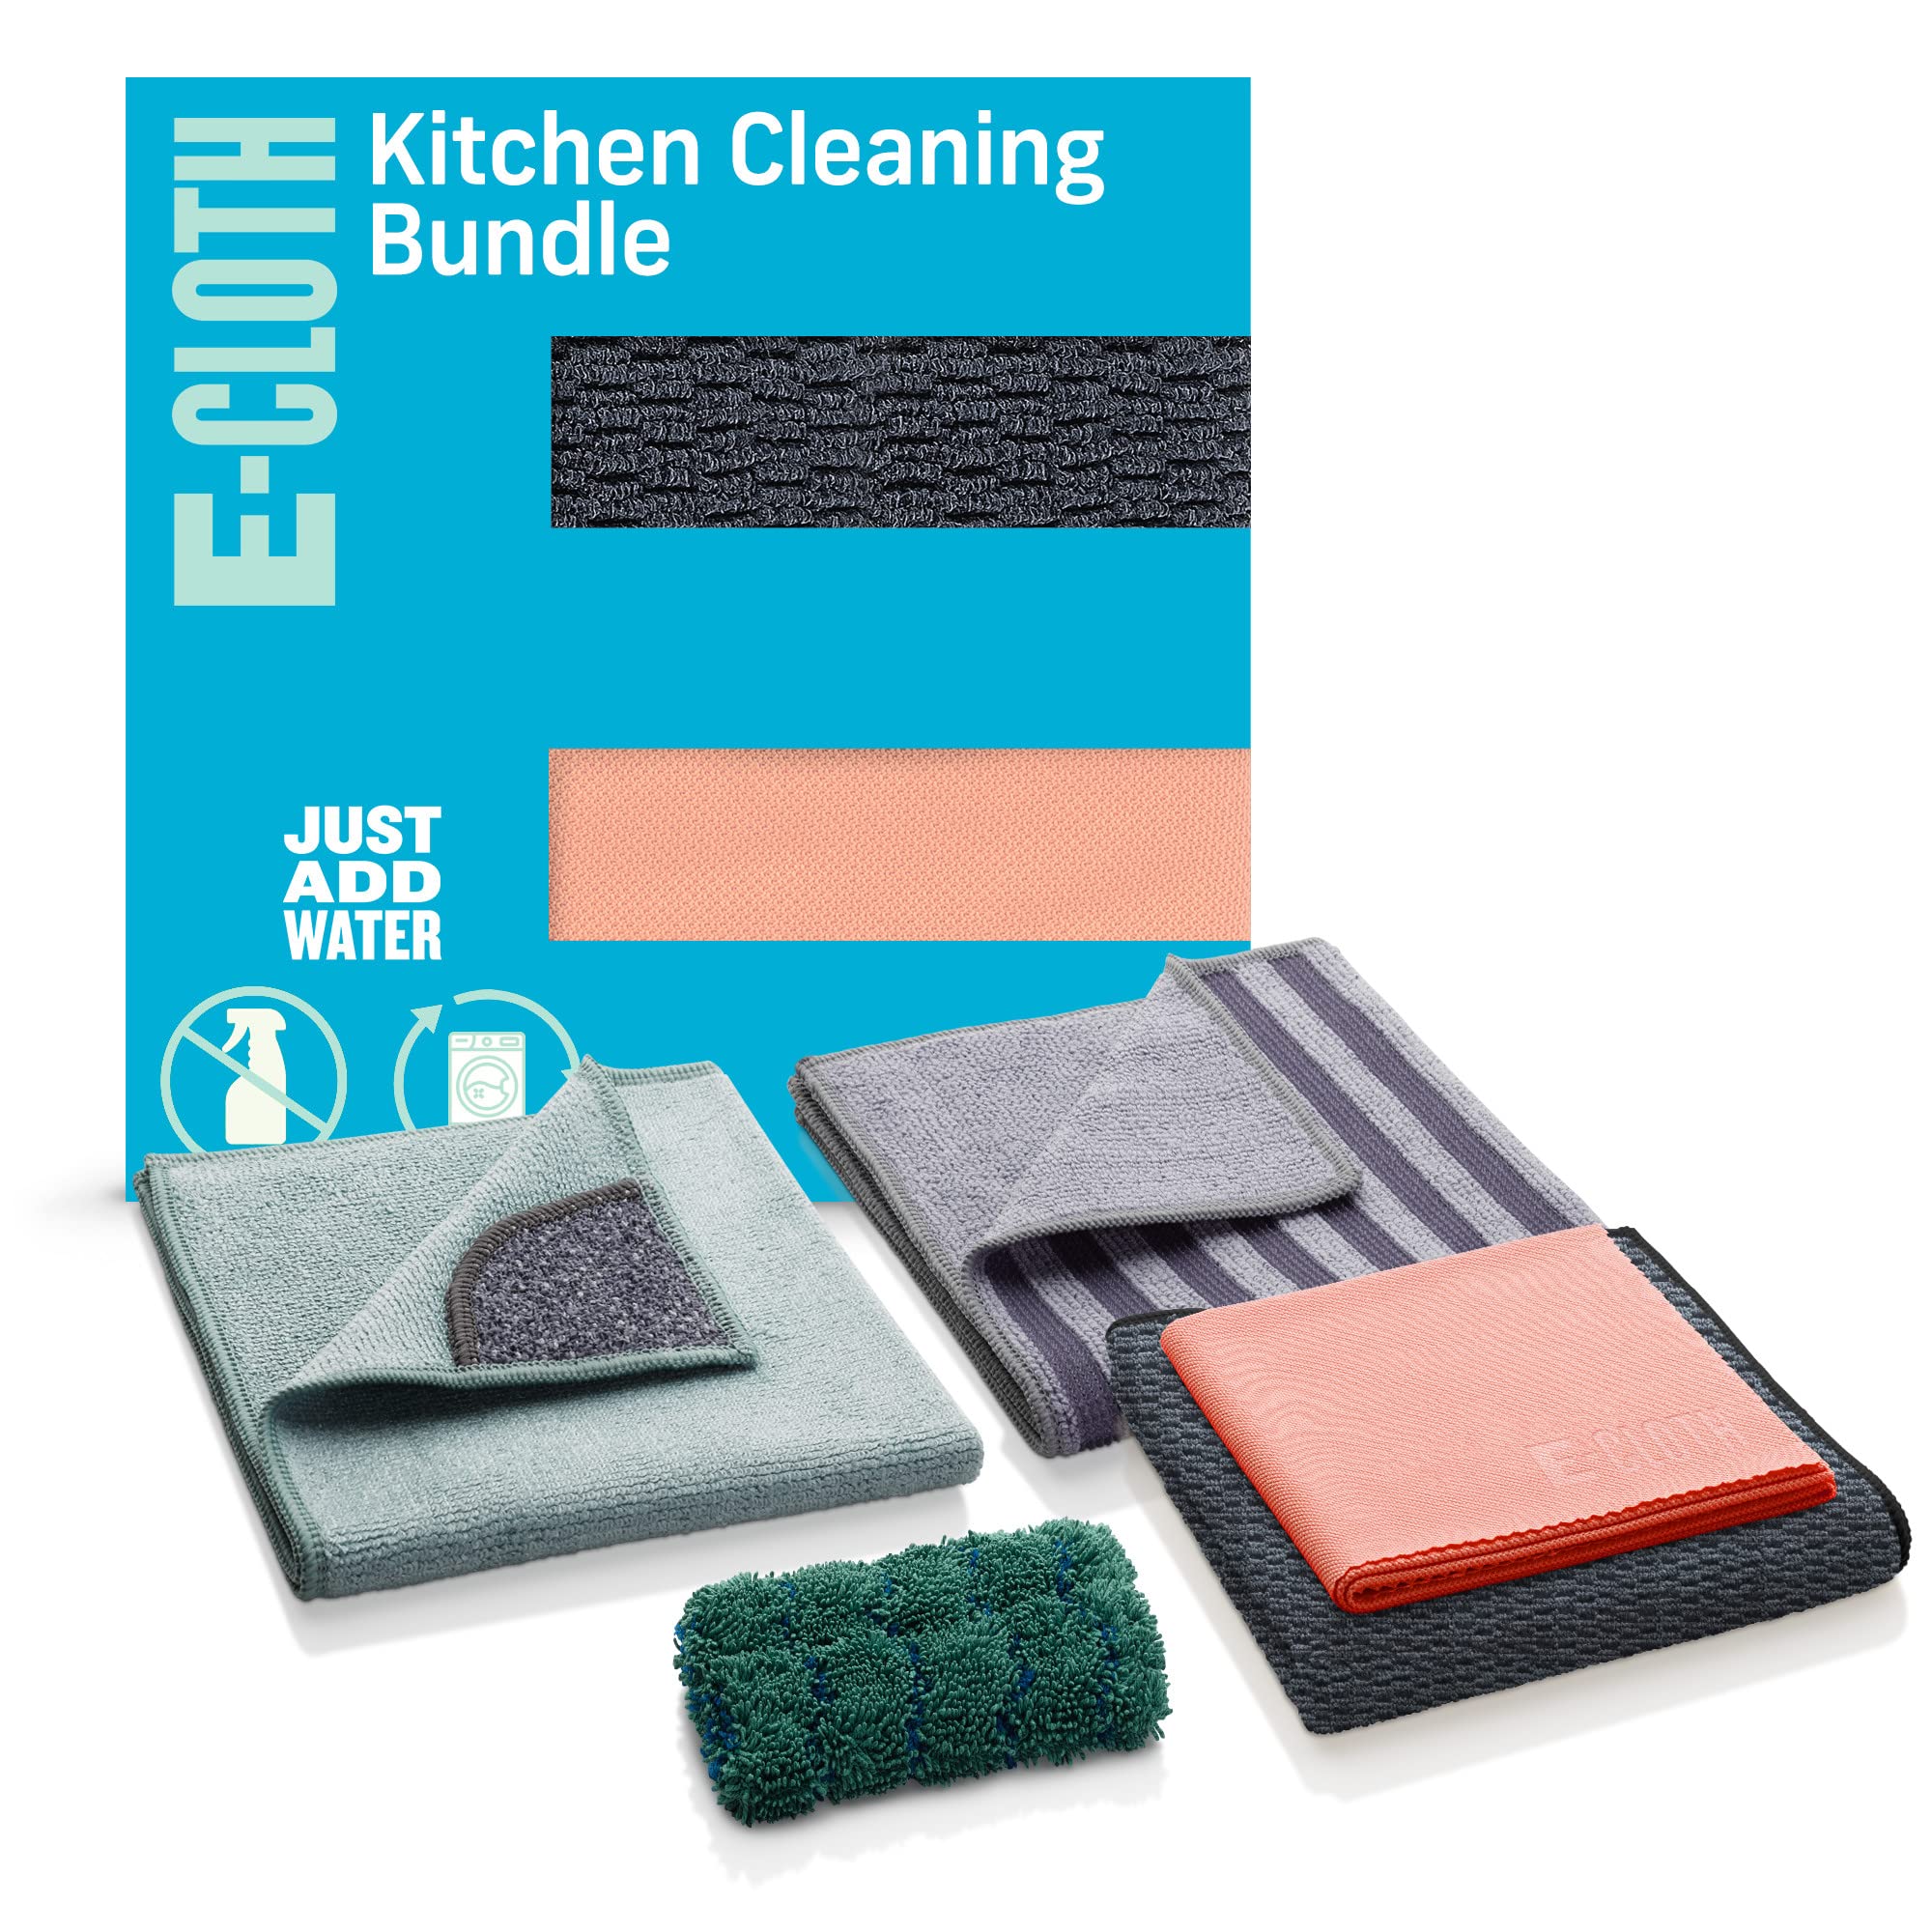 E-Cloth 5-pc Kitchen Bundle, Microfiber Cleaning Cloths Set with Dish Scrubber, Ideal Spotless Cleaner for Granite, Marble, Kitchen, Sink, Dish and Stainless Steel Pot and Pans, 100 Wash Promise